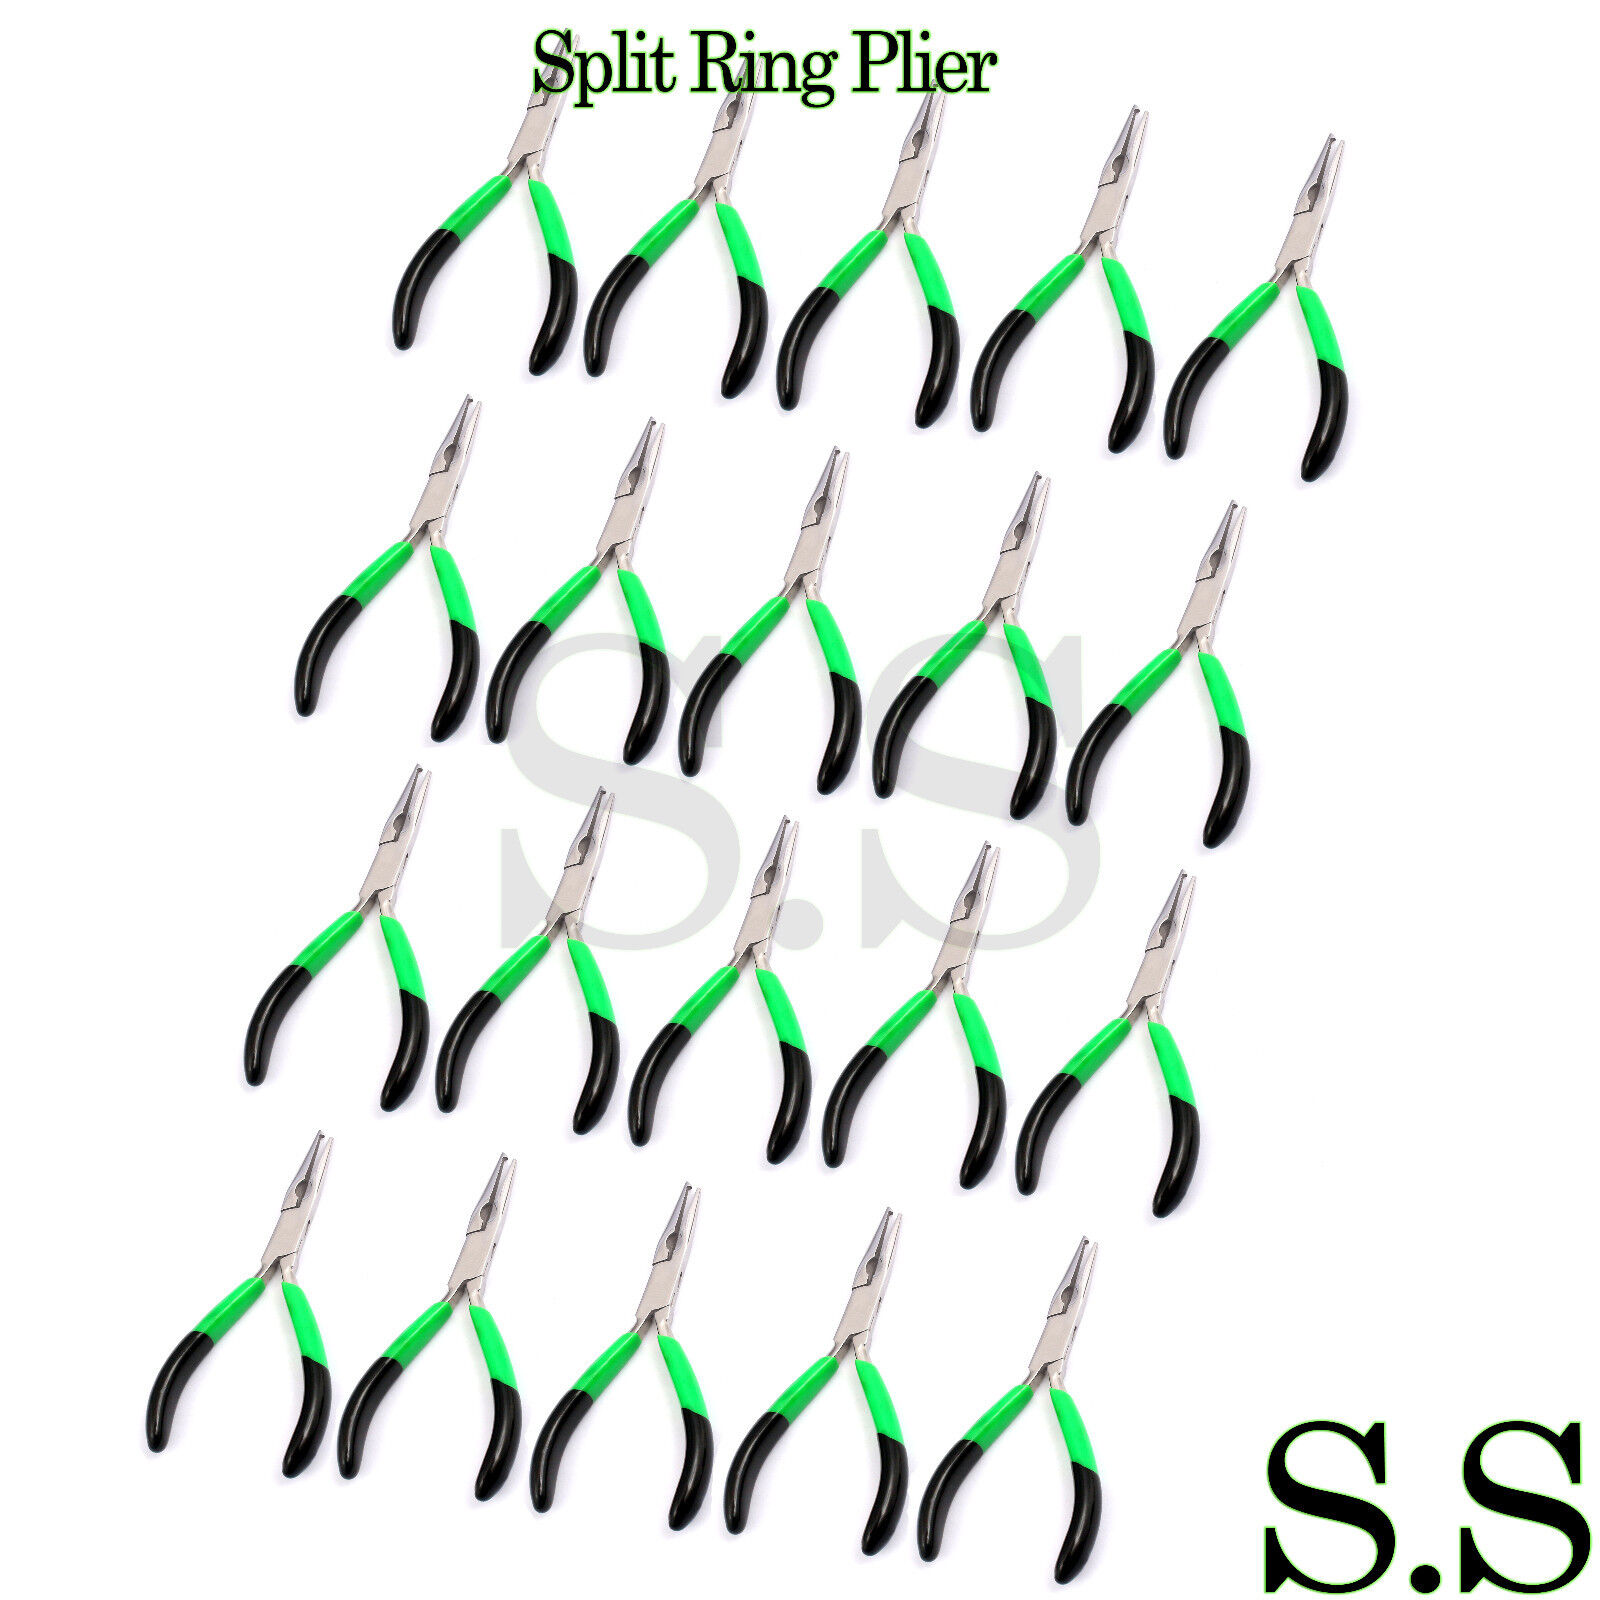 45 Pcs Split Ring Plier 5.5"  Free Shipping New Brand S.S Does Not Apply